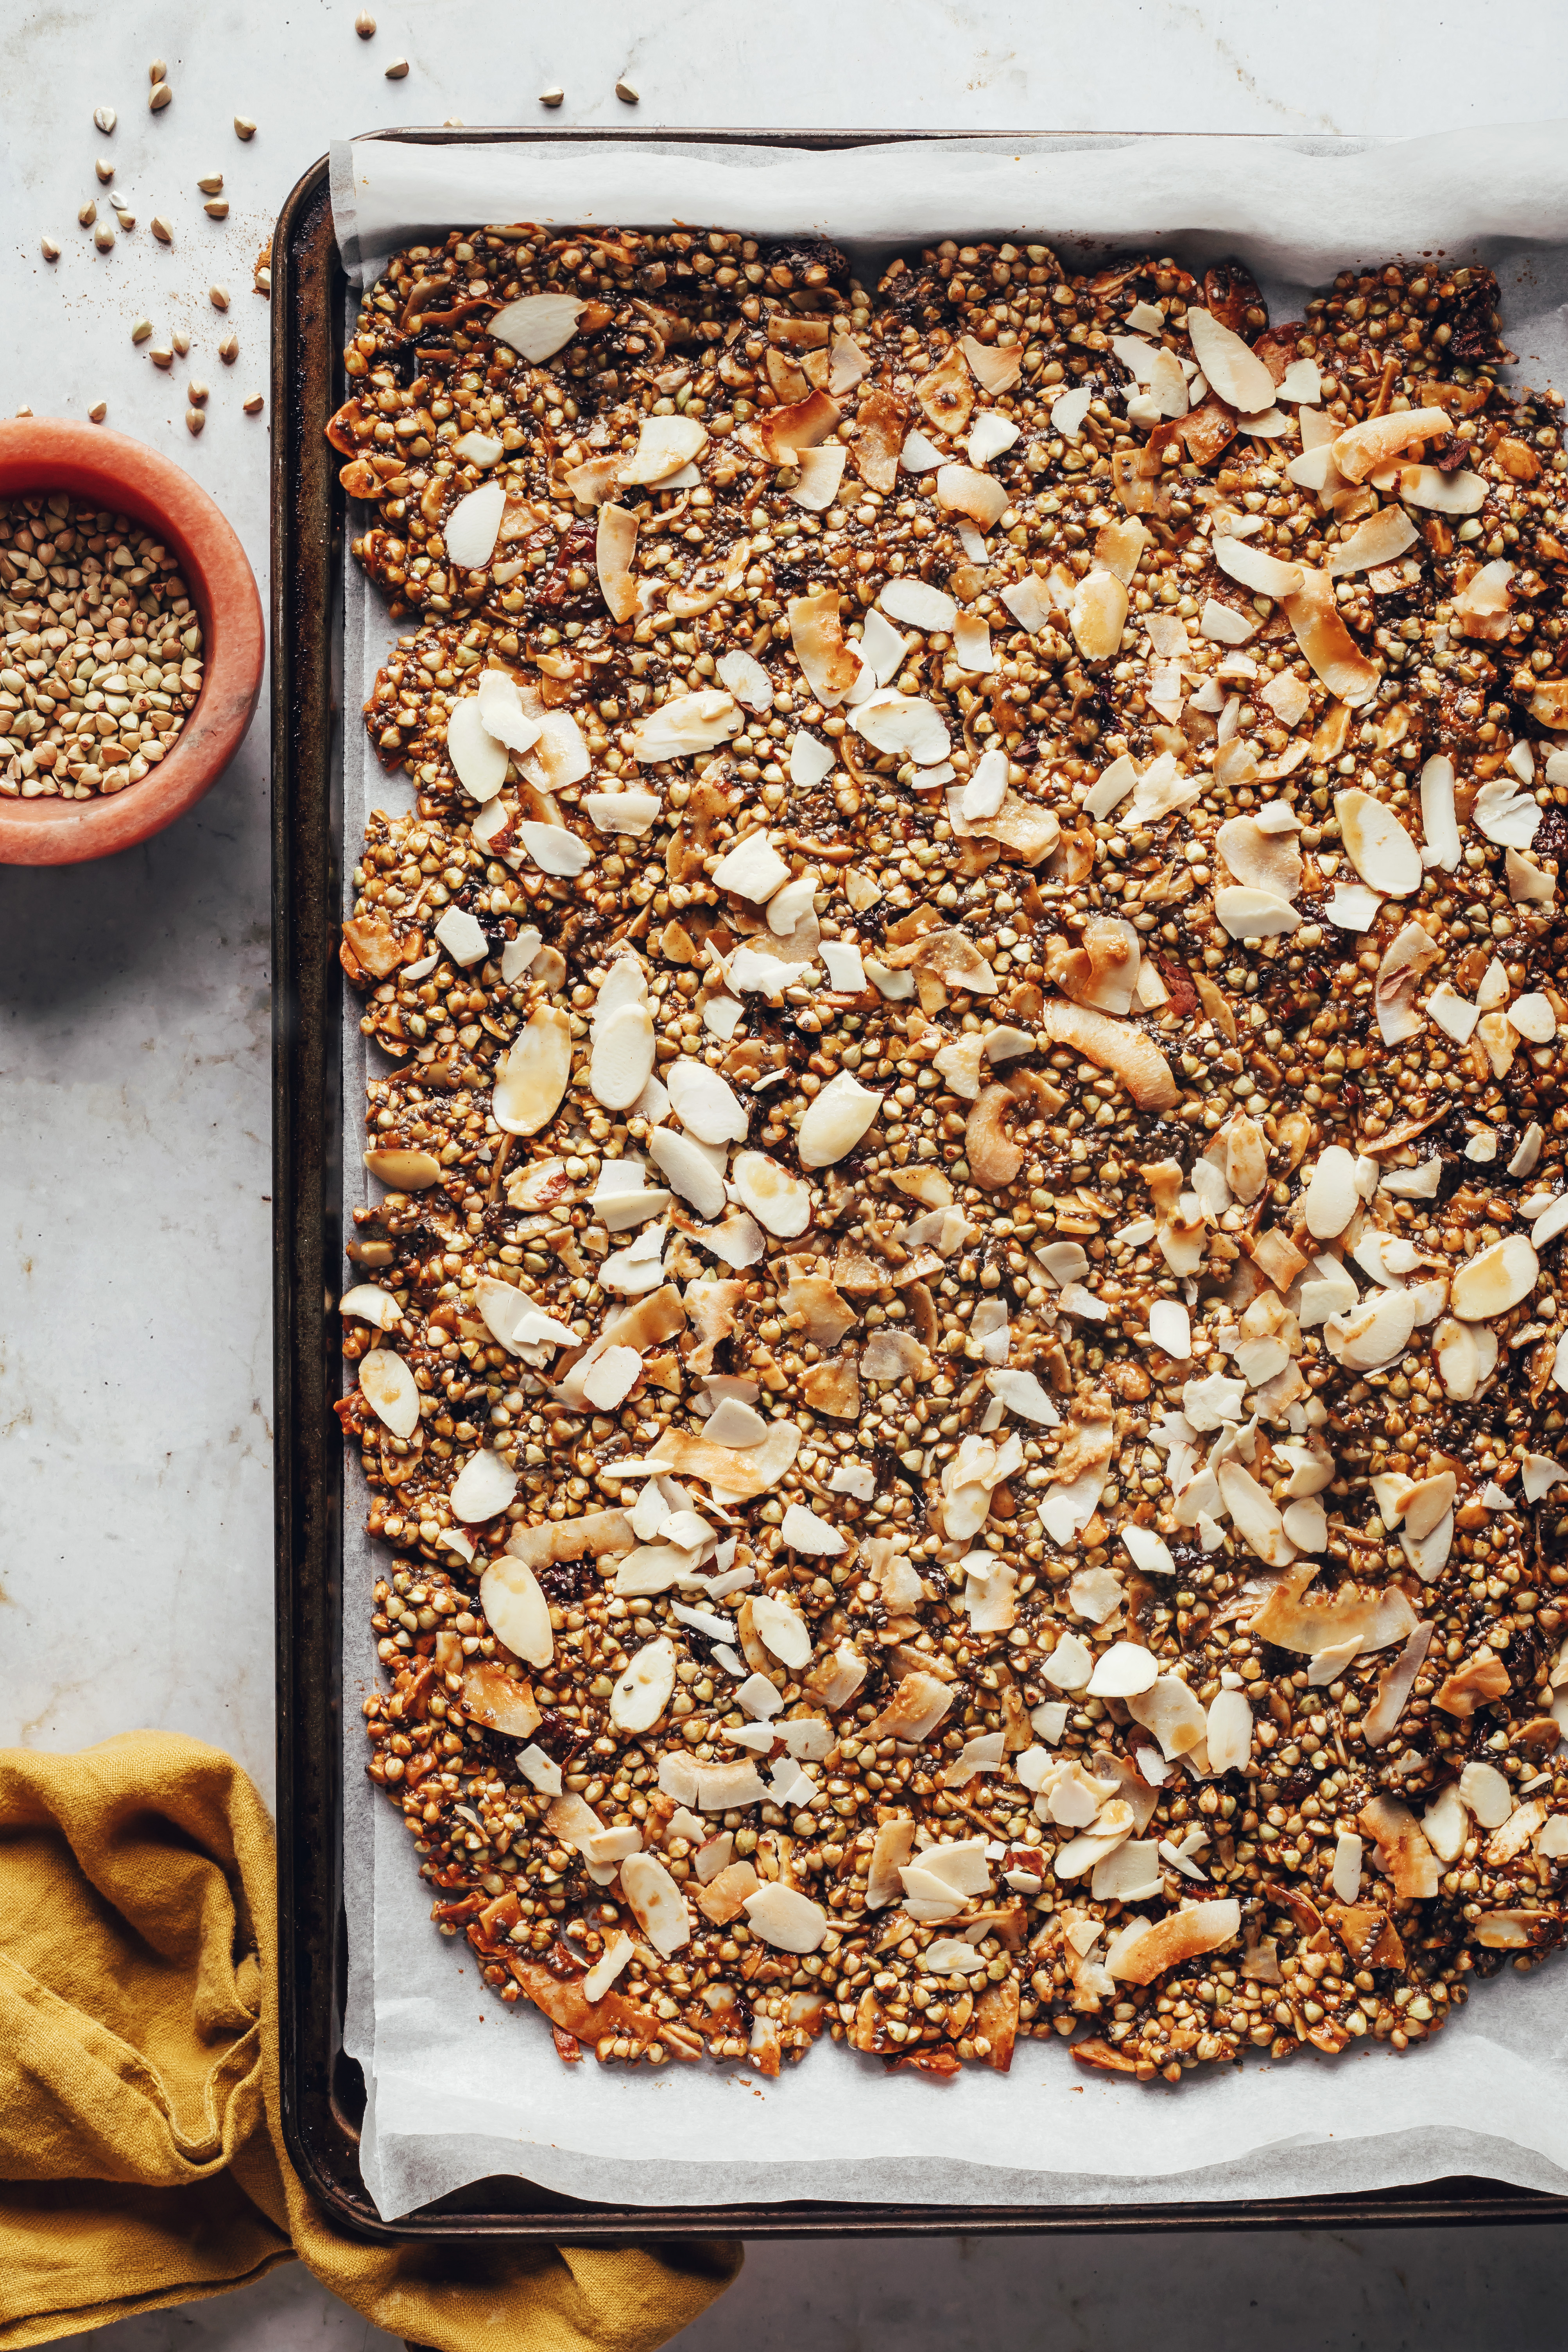 Granola spread on a baking sheet before baking